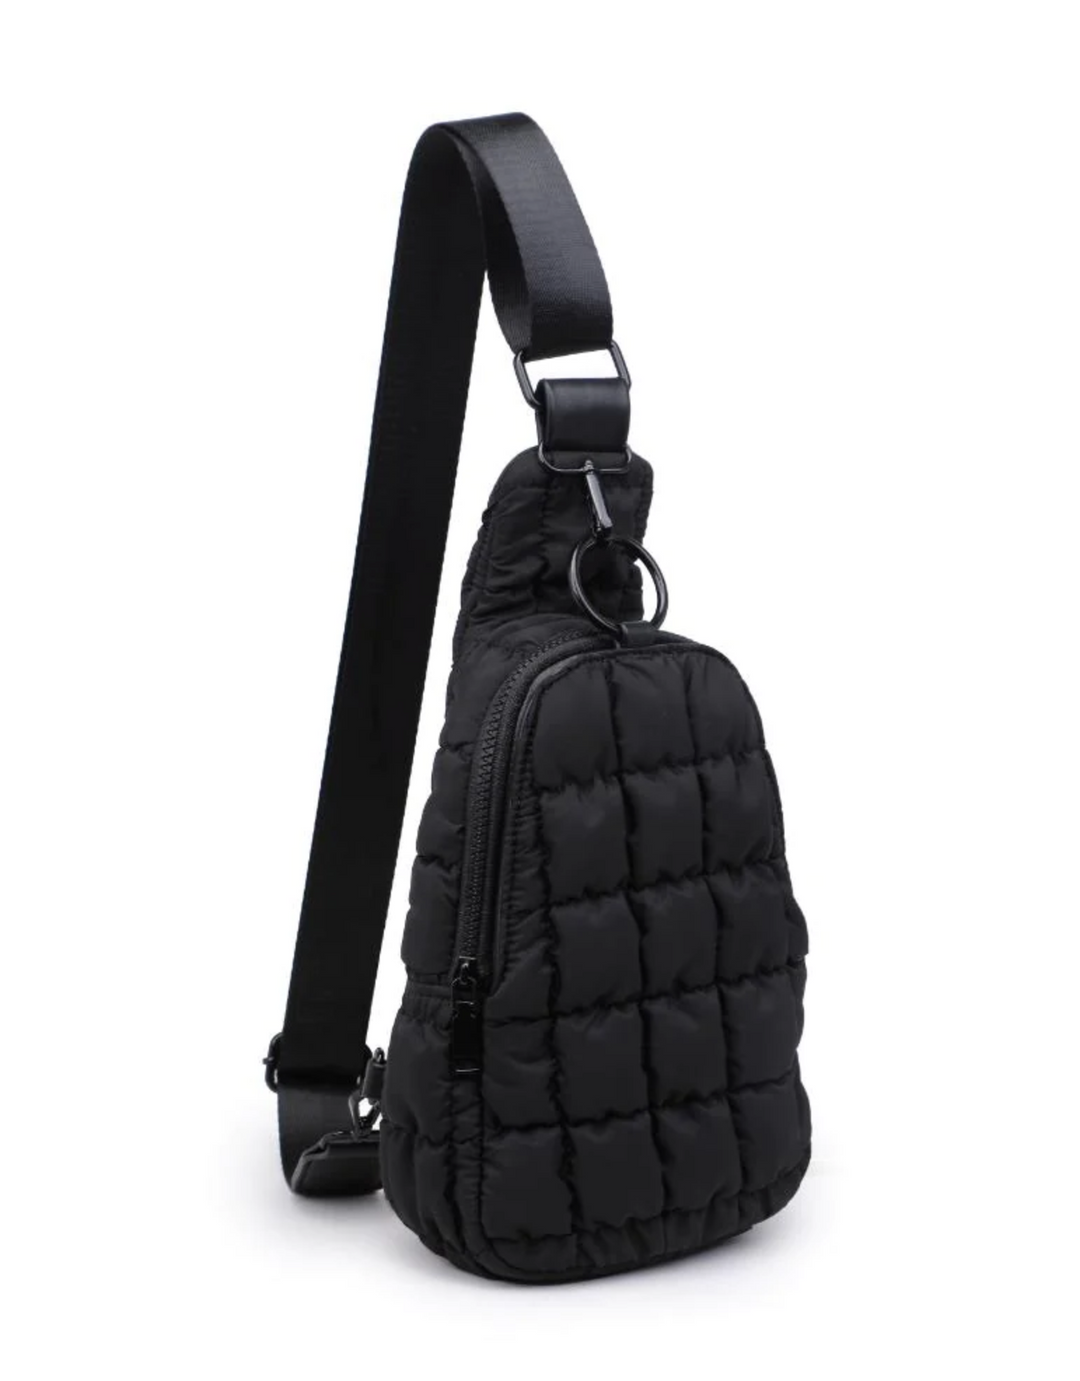 Puffy Perfection Sling Bag, Black